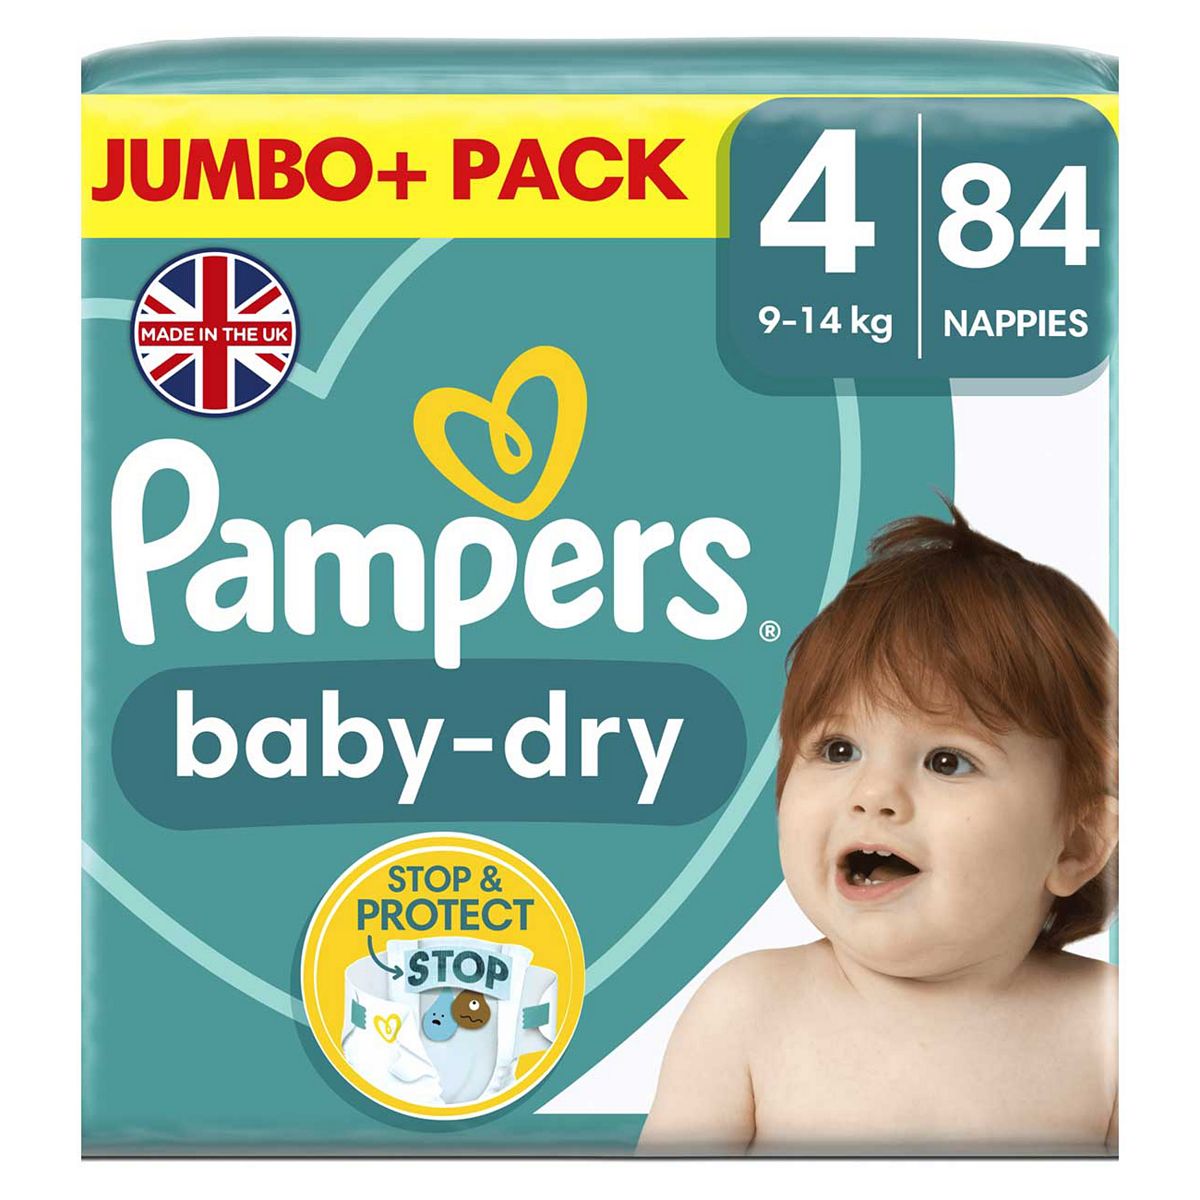 Pampers Baby-Dry Size 4, 84 Nappies, 9kg - 14kg, Jumbo+ Pack GOODS Boots   